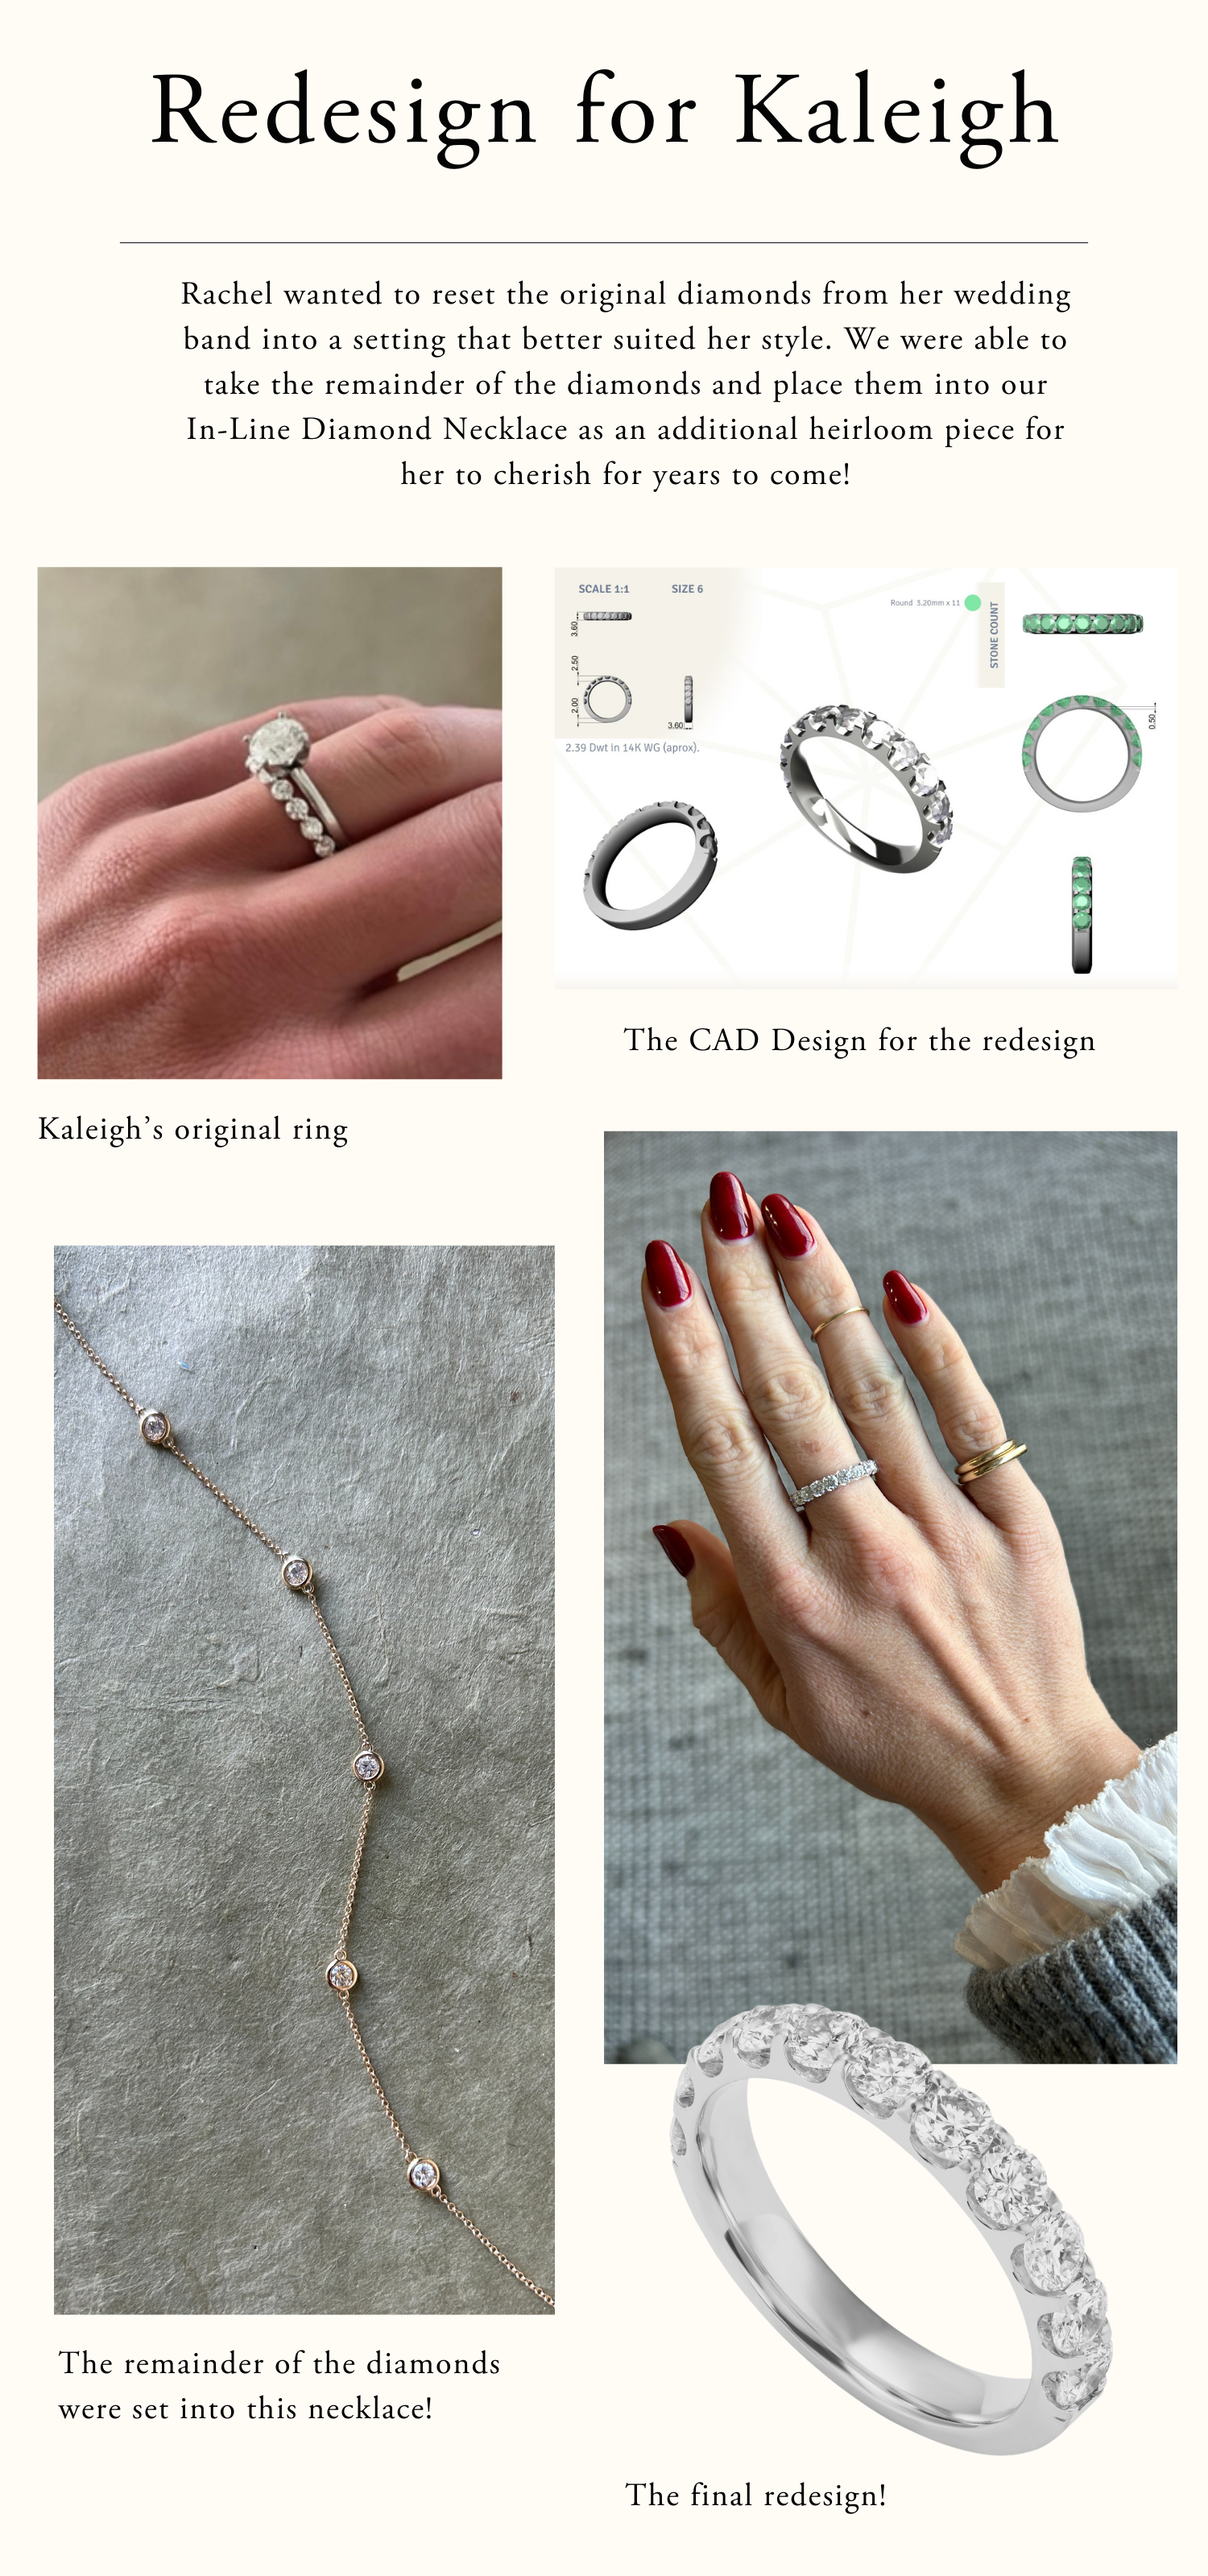 Custom Bridal Projects - Kaleigh's Redesign